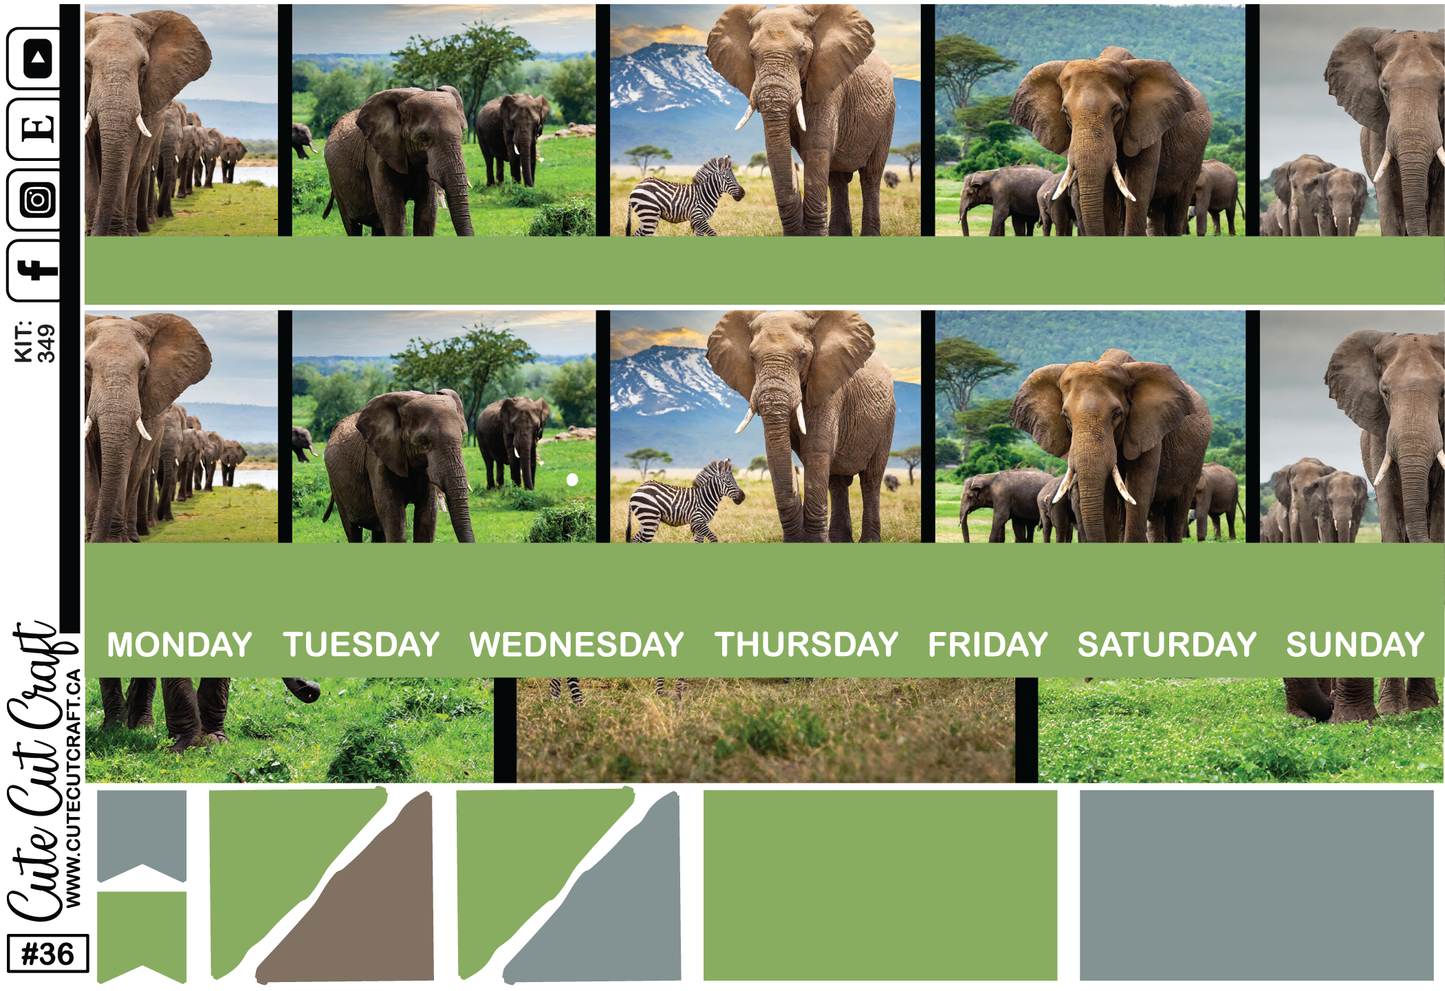 Elephant Expedition #349 || 7x9 Monthly